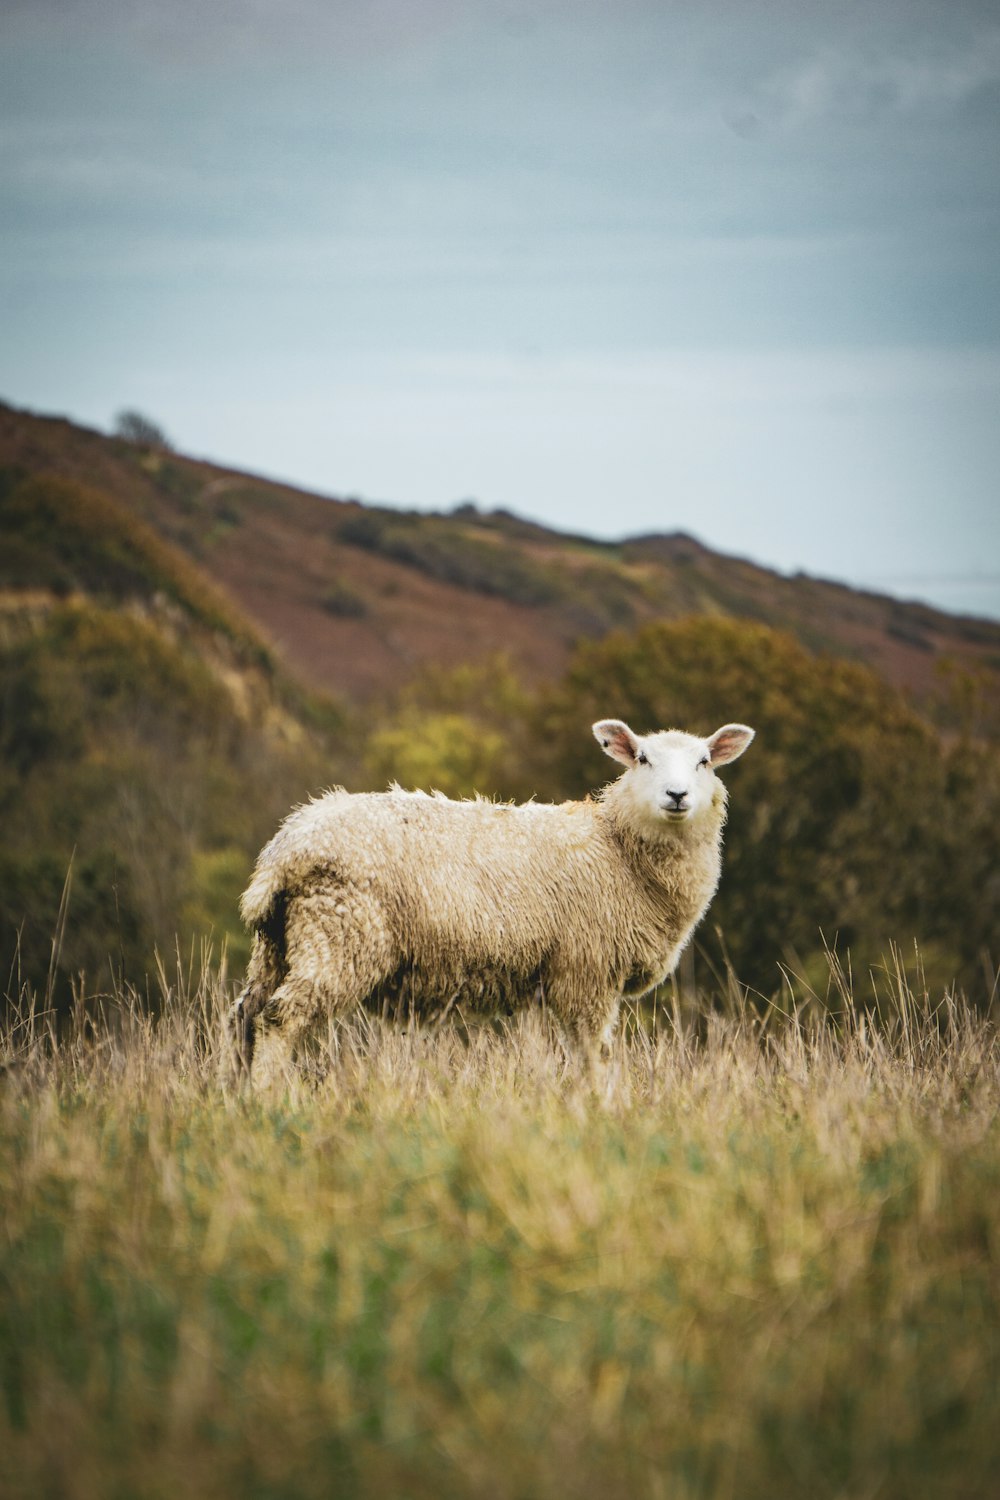 a sheep standing in a field